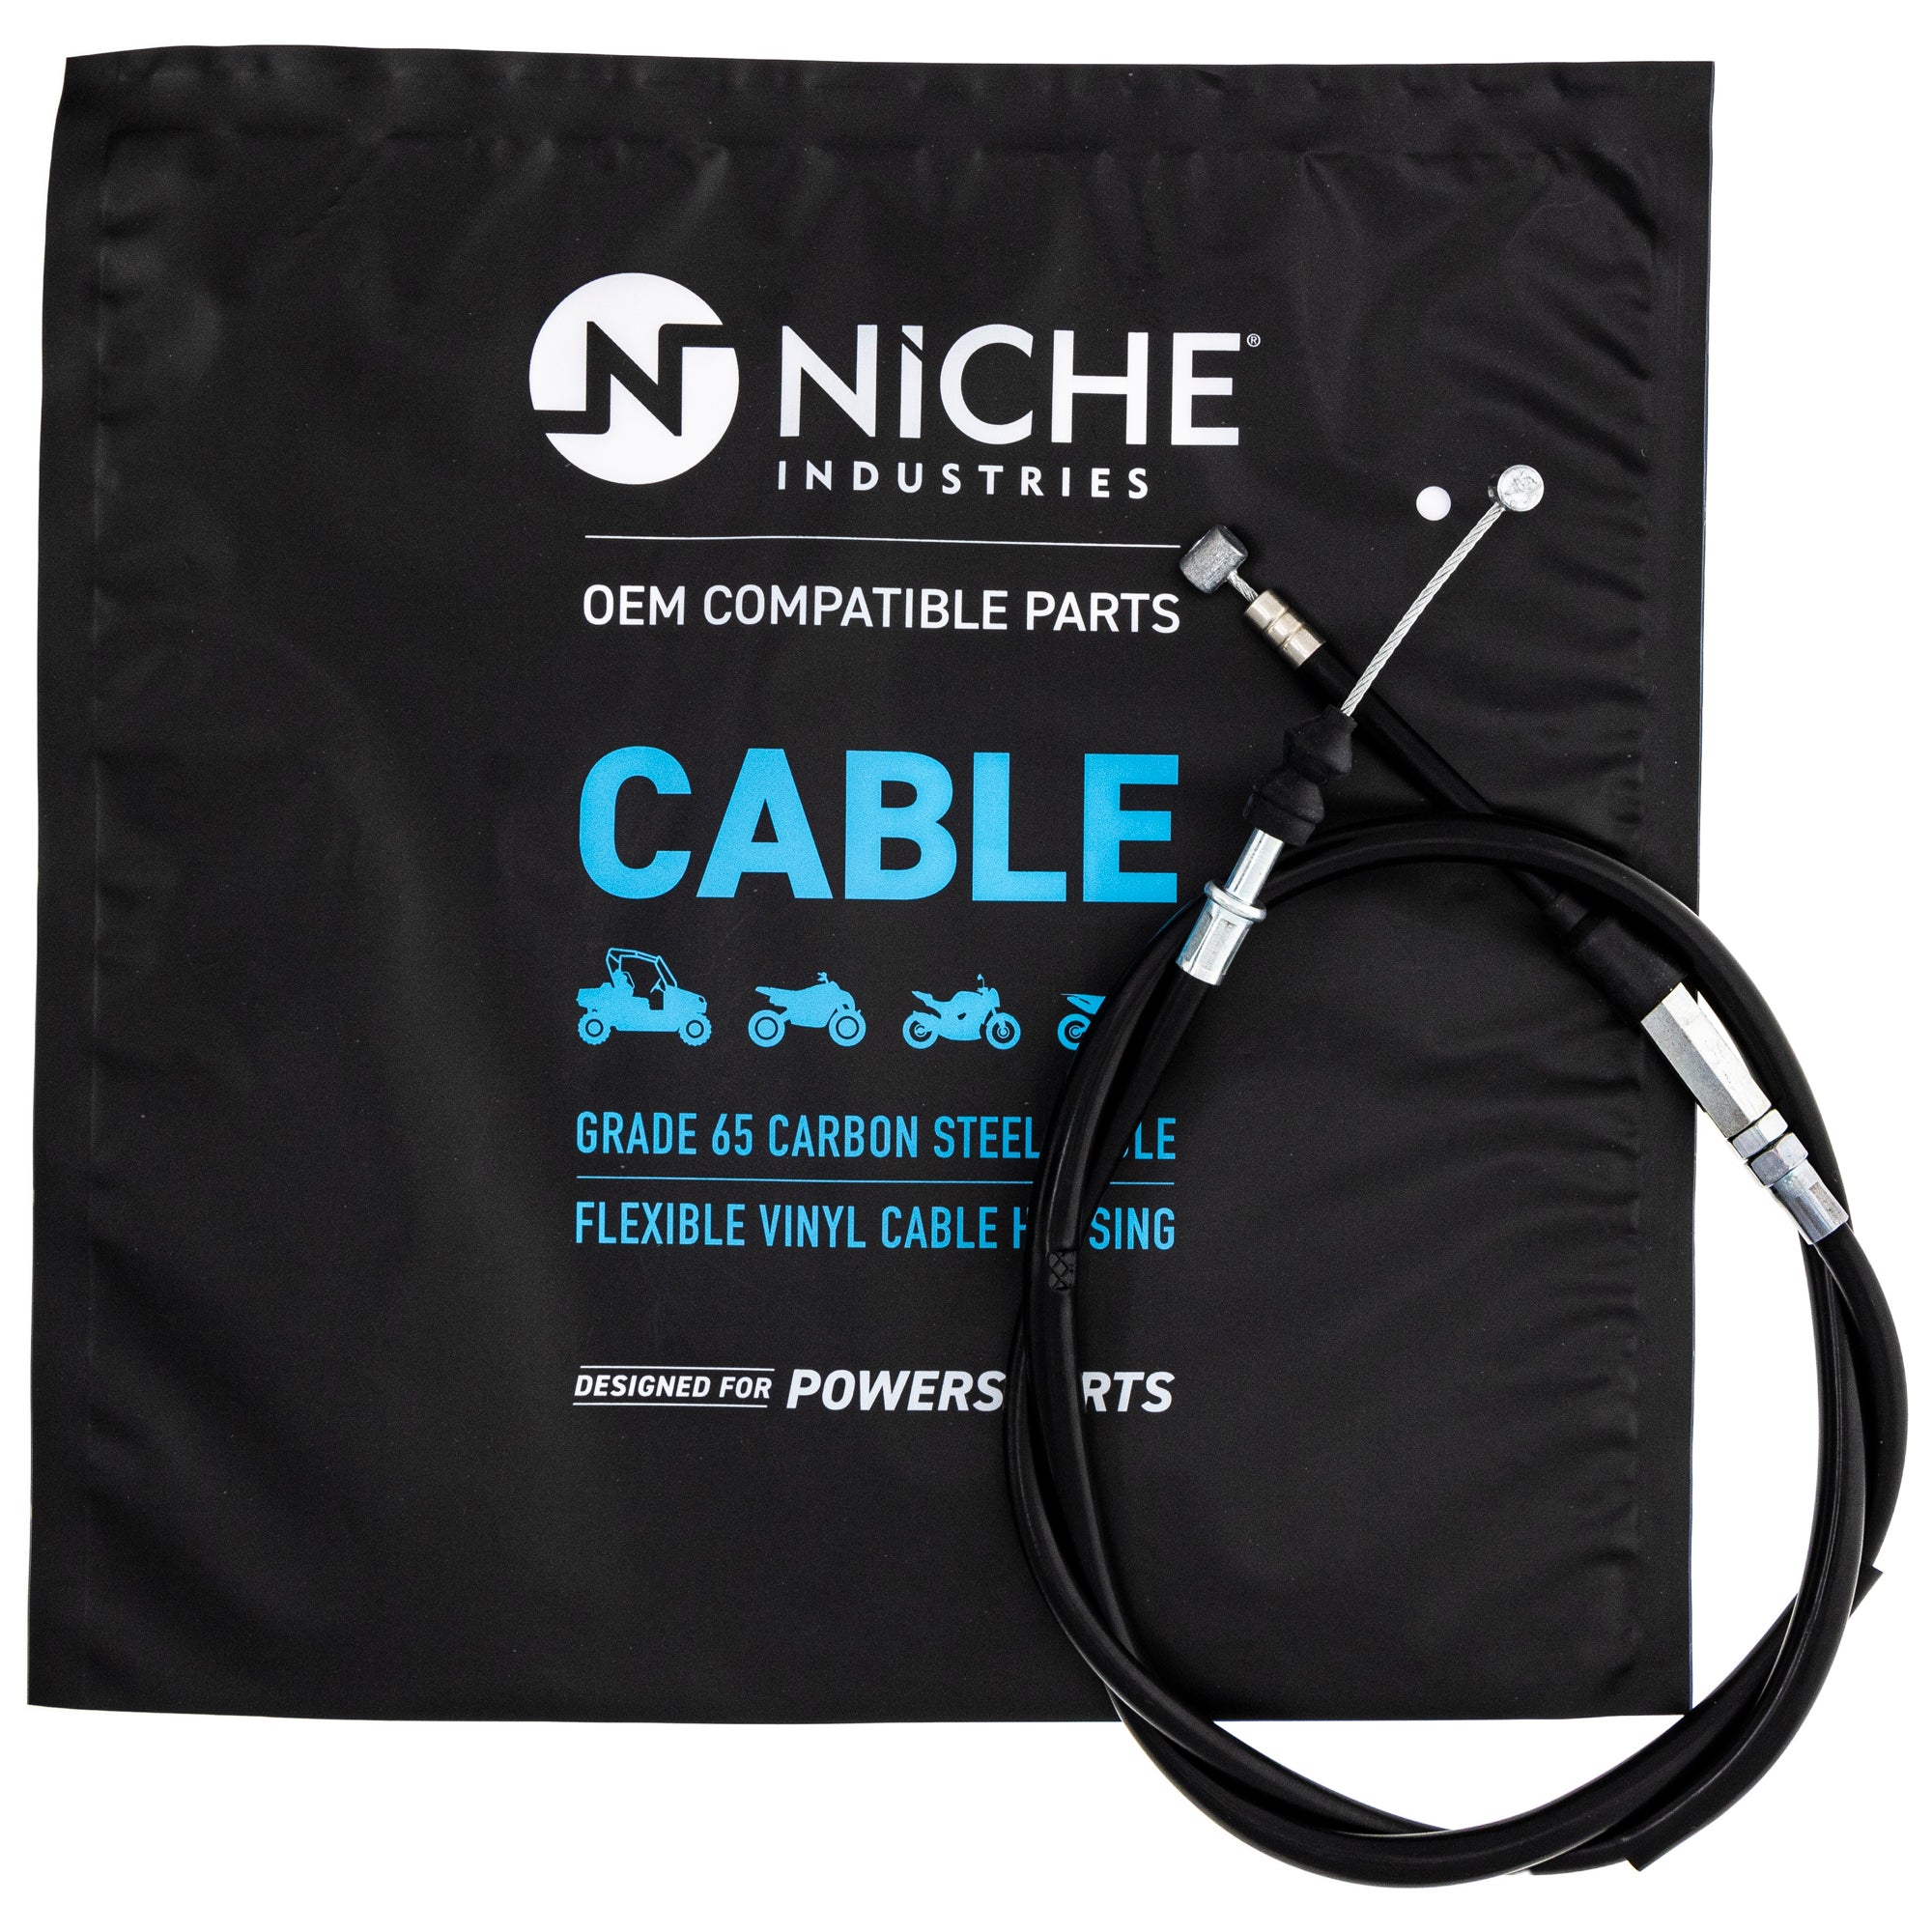 NICHE 519-CCB2396L Clutch Cable for zOTHER RM250 RM125